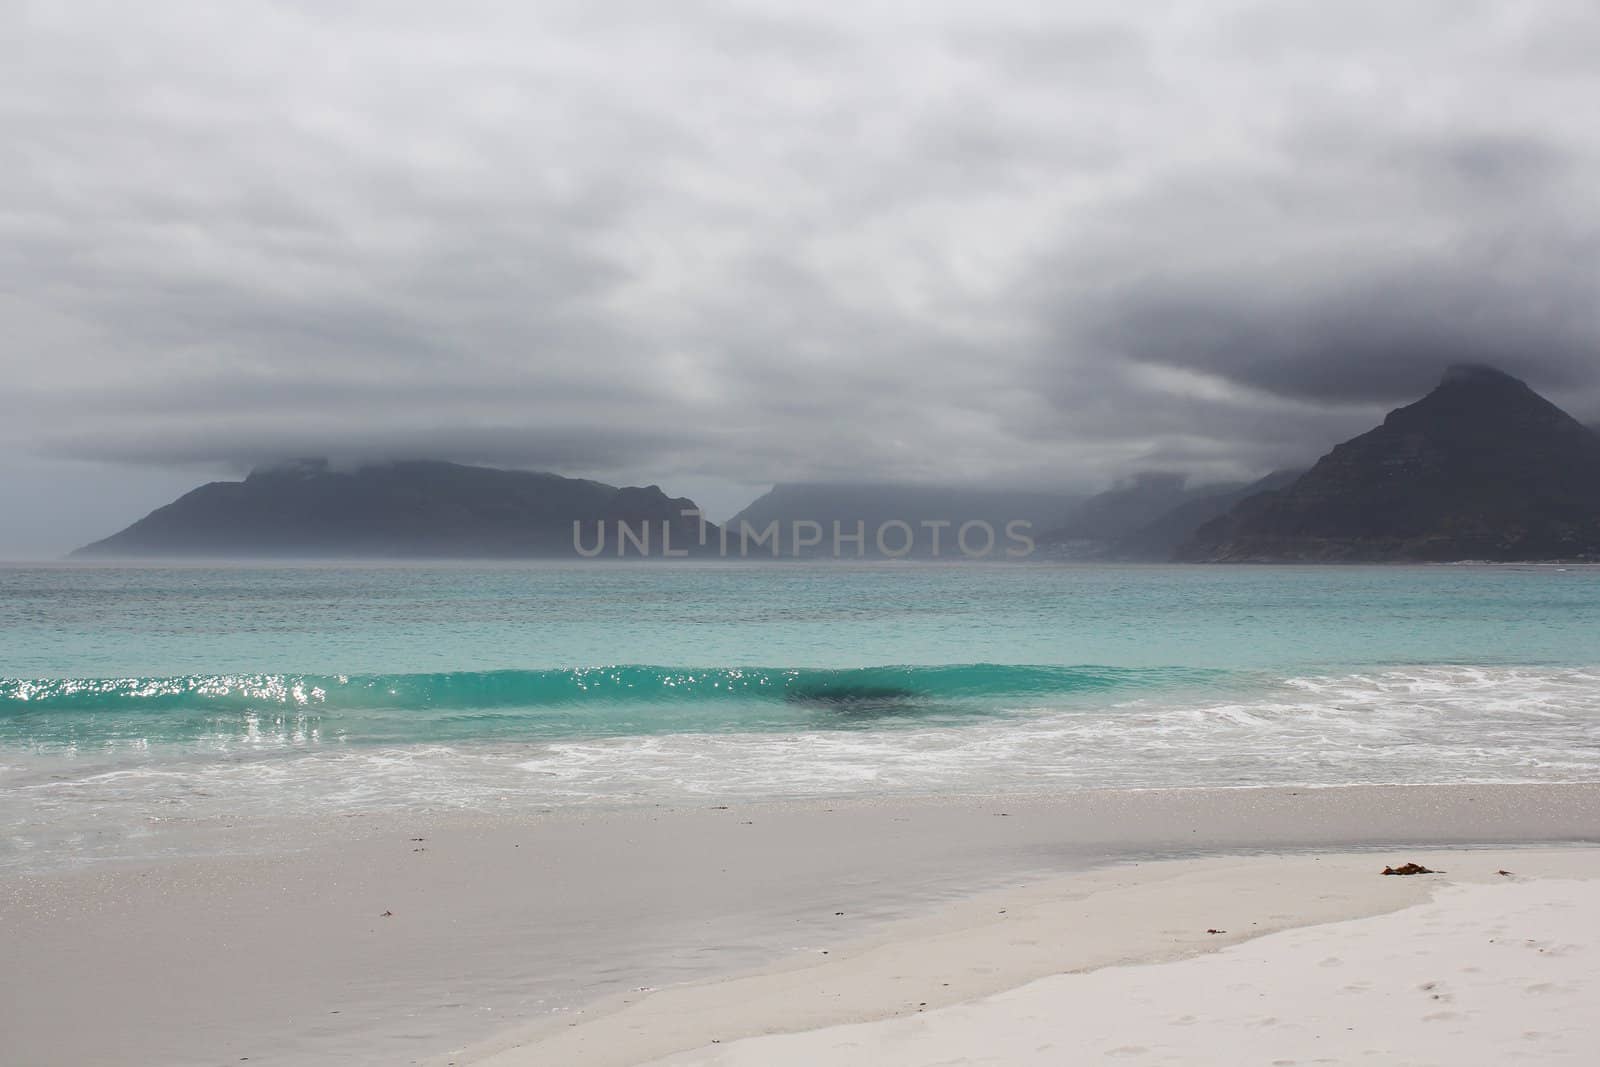 Beach of Kommetjie with an upcoming storm in the background by dwaschnig_photo